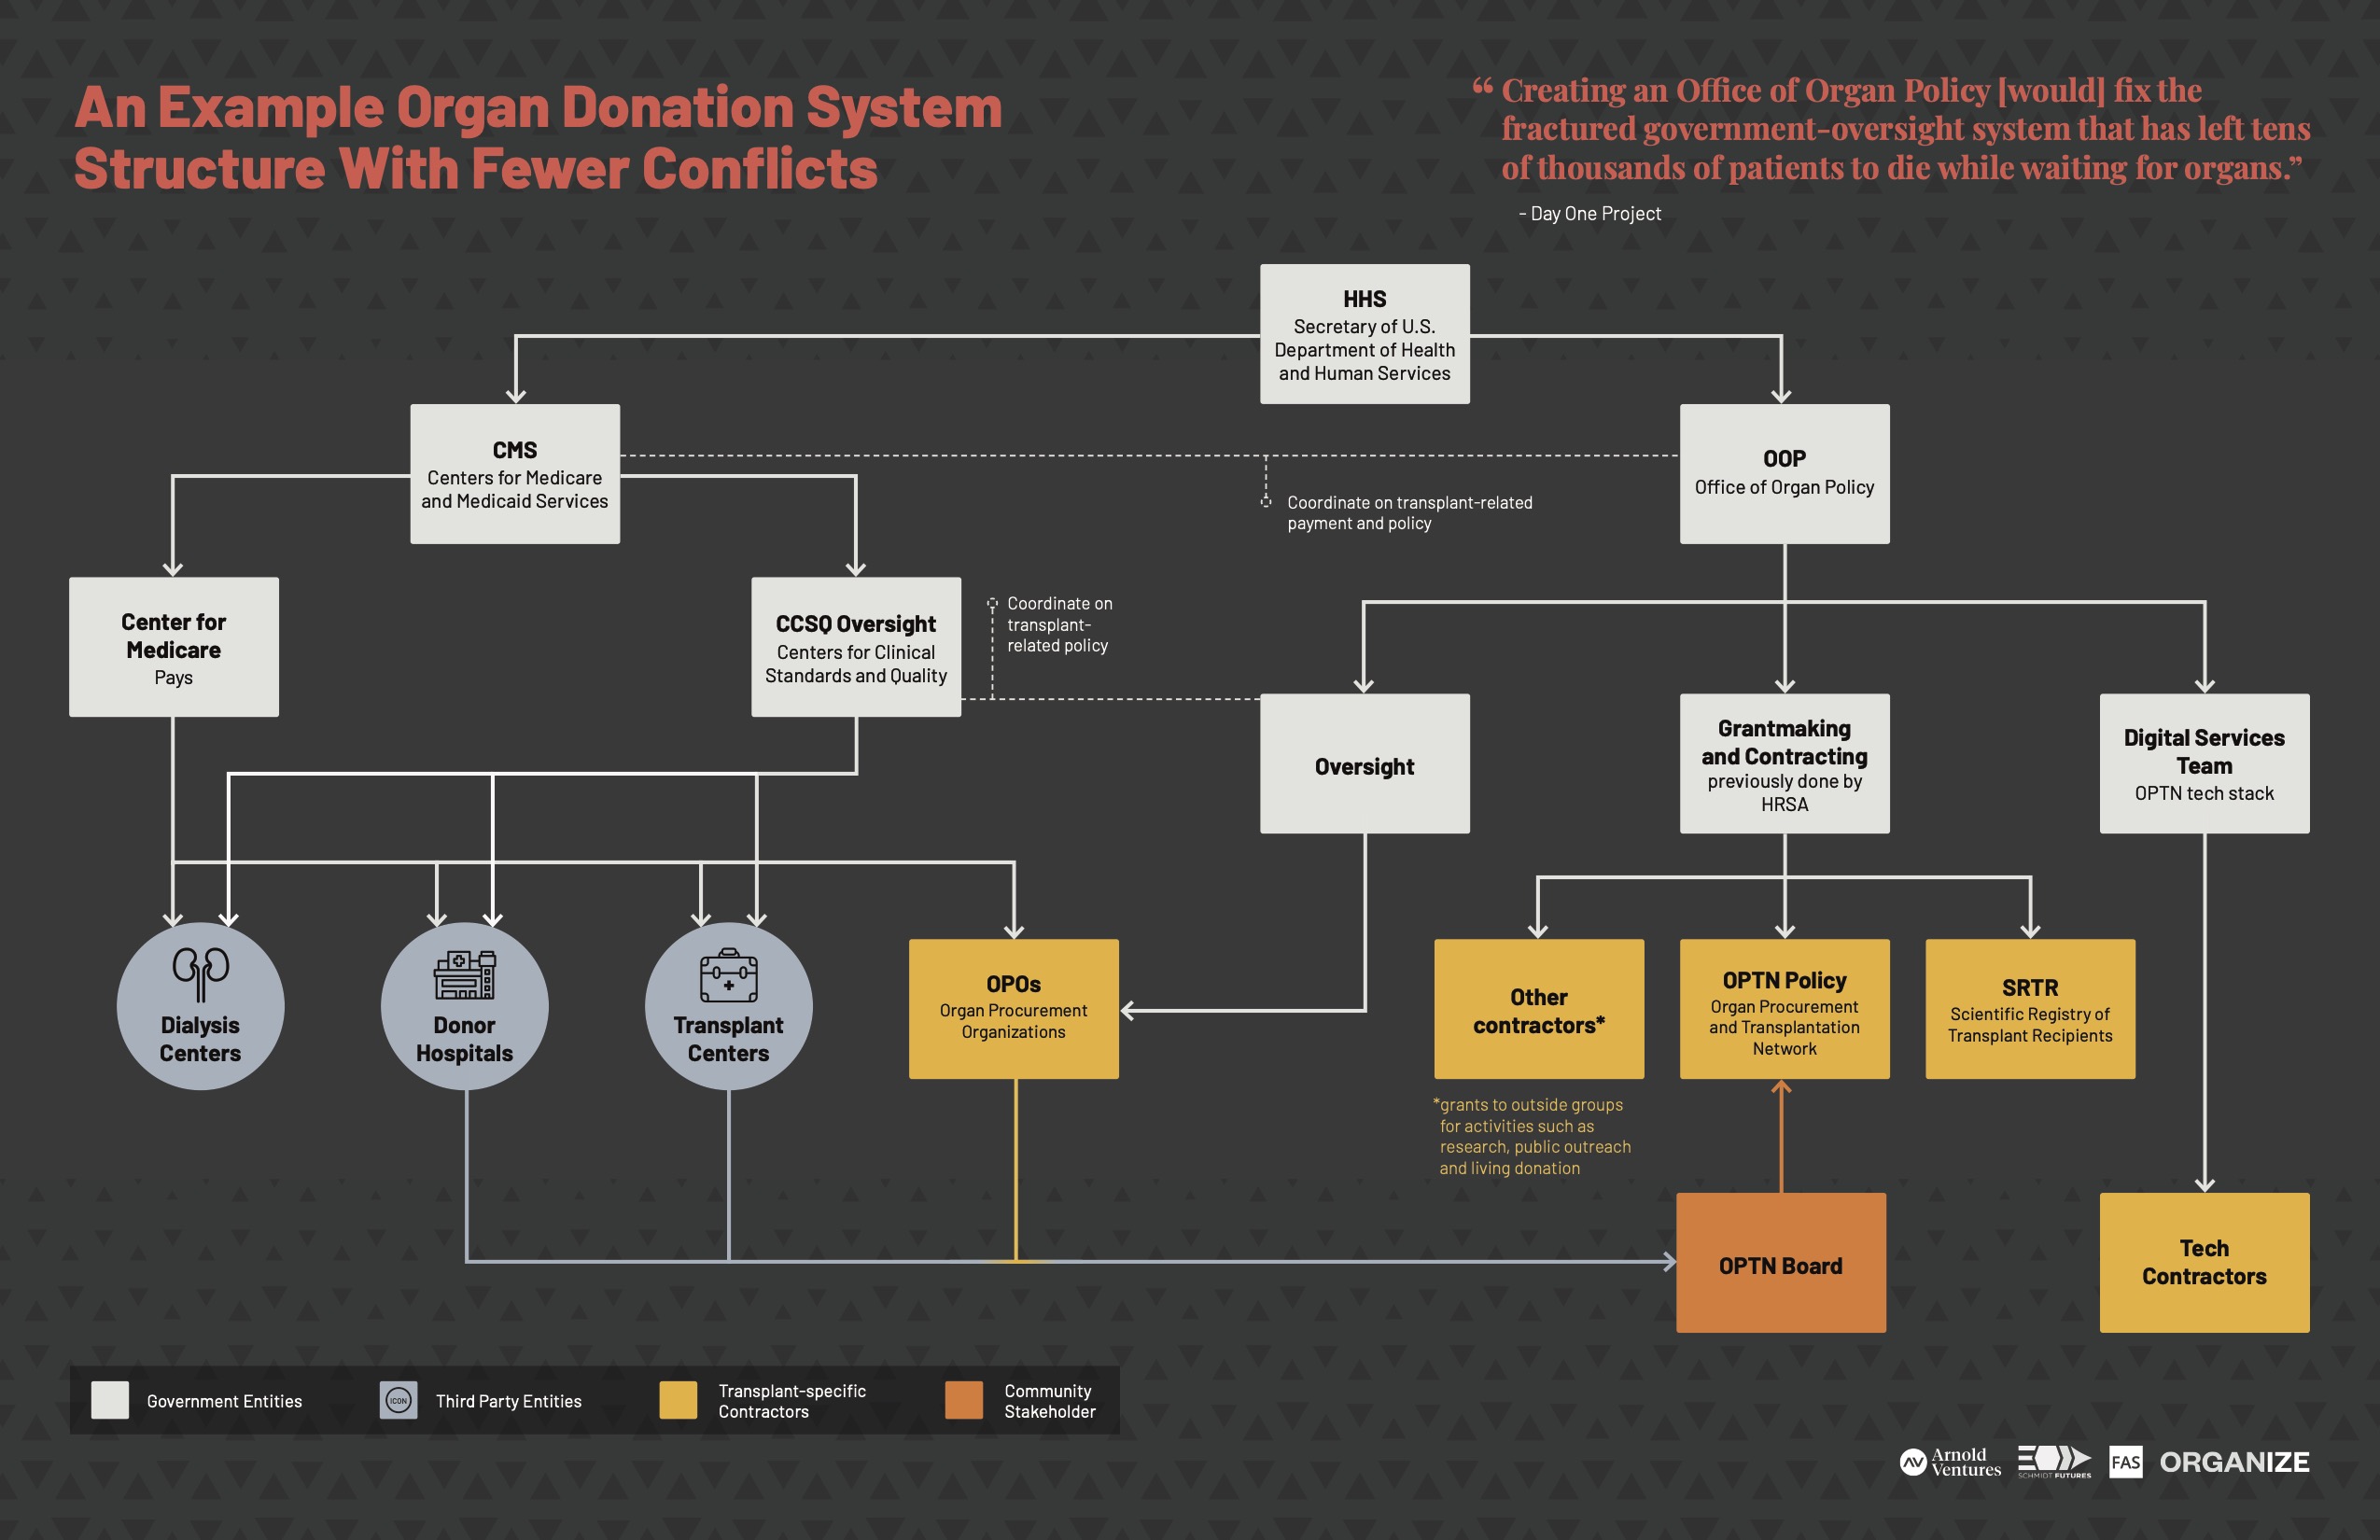 An example organ donation system structure with fewer conflicts (PDF)